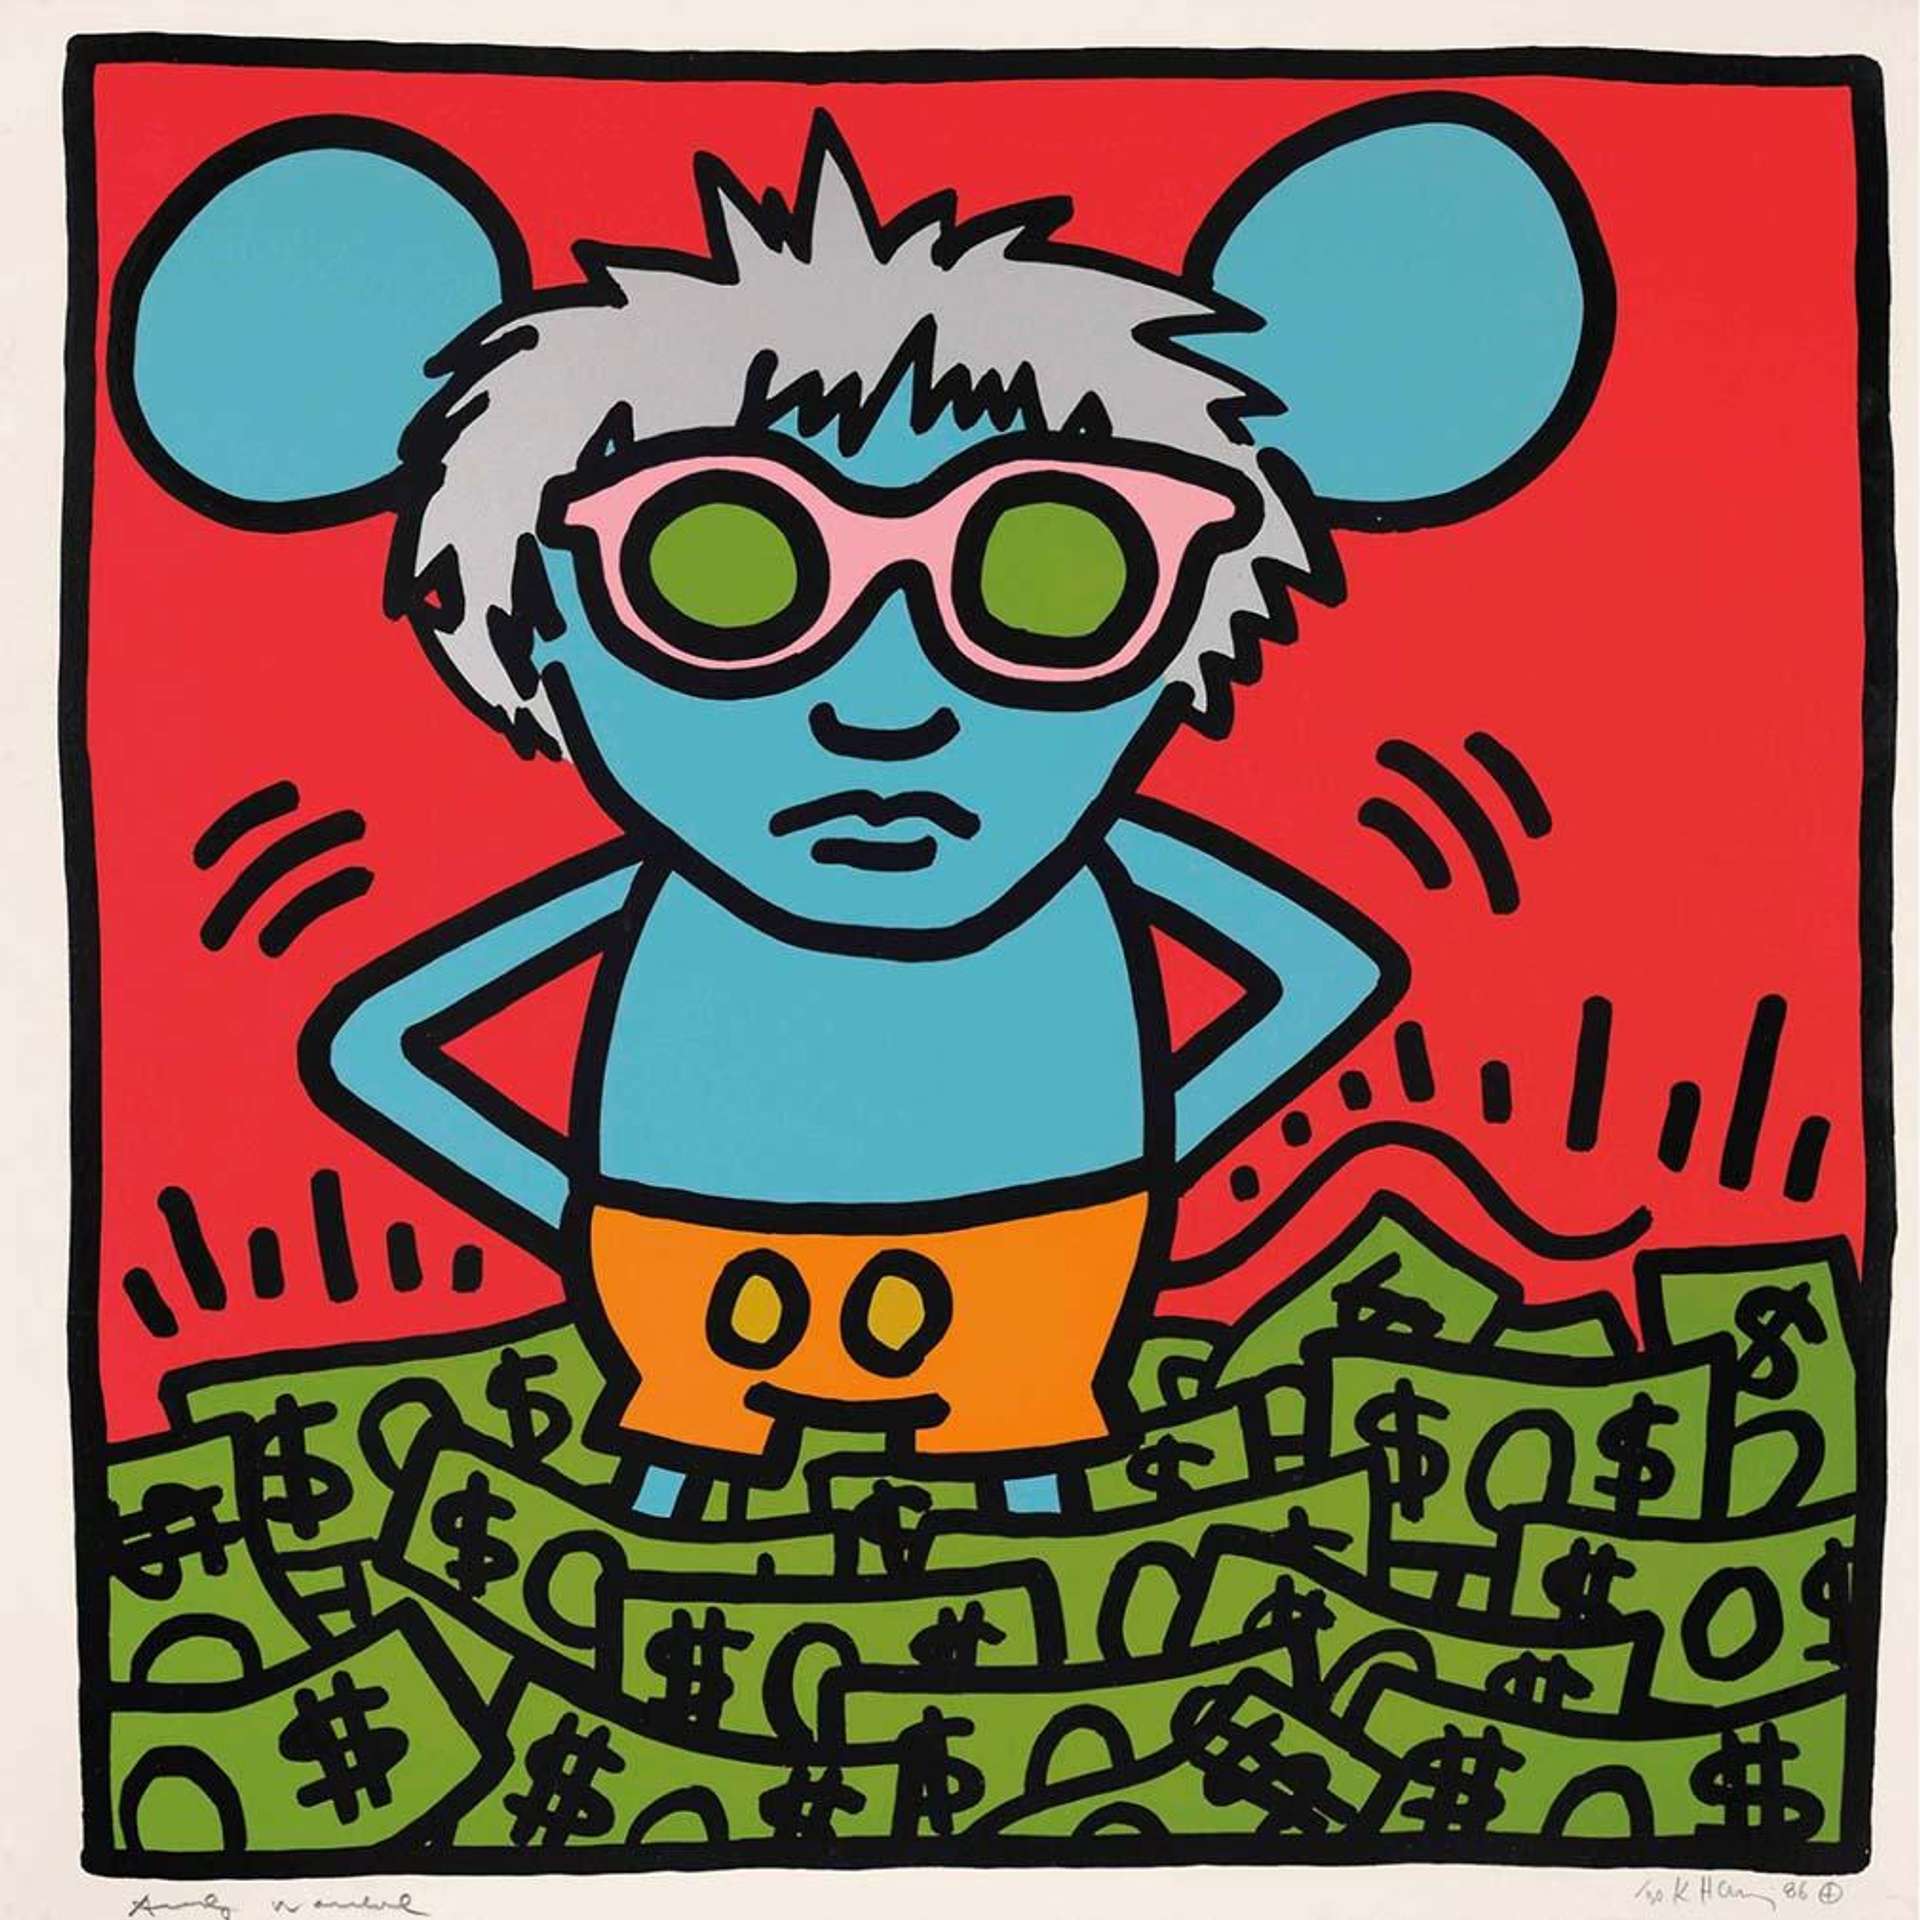 A screenprint by Keith Haring depicting a mouse in the image of Andy Warhol, standing in a beg of green dollar bills against a bright red background.